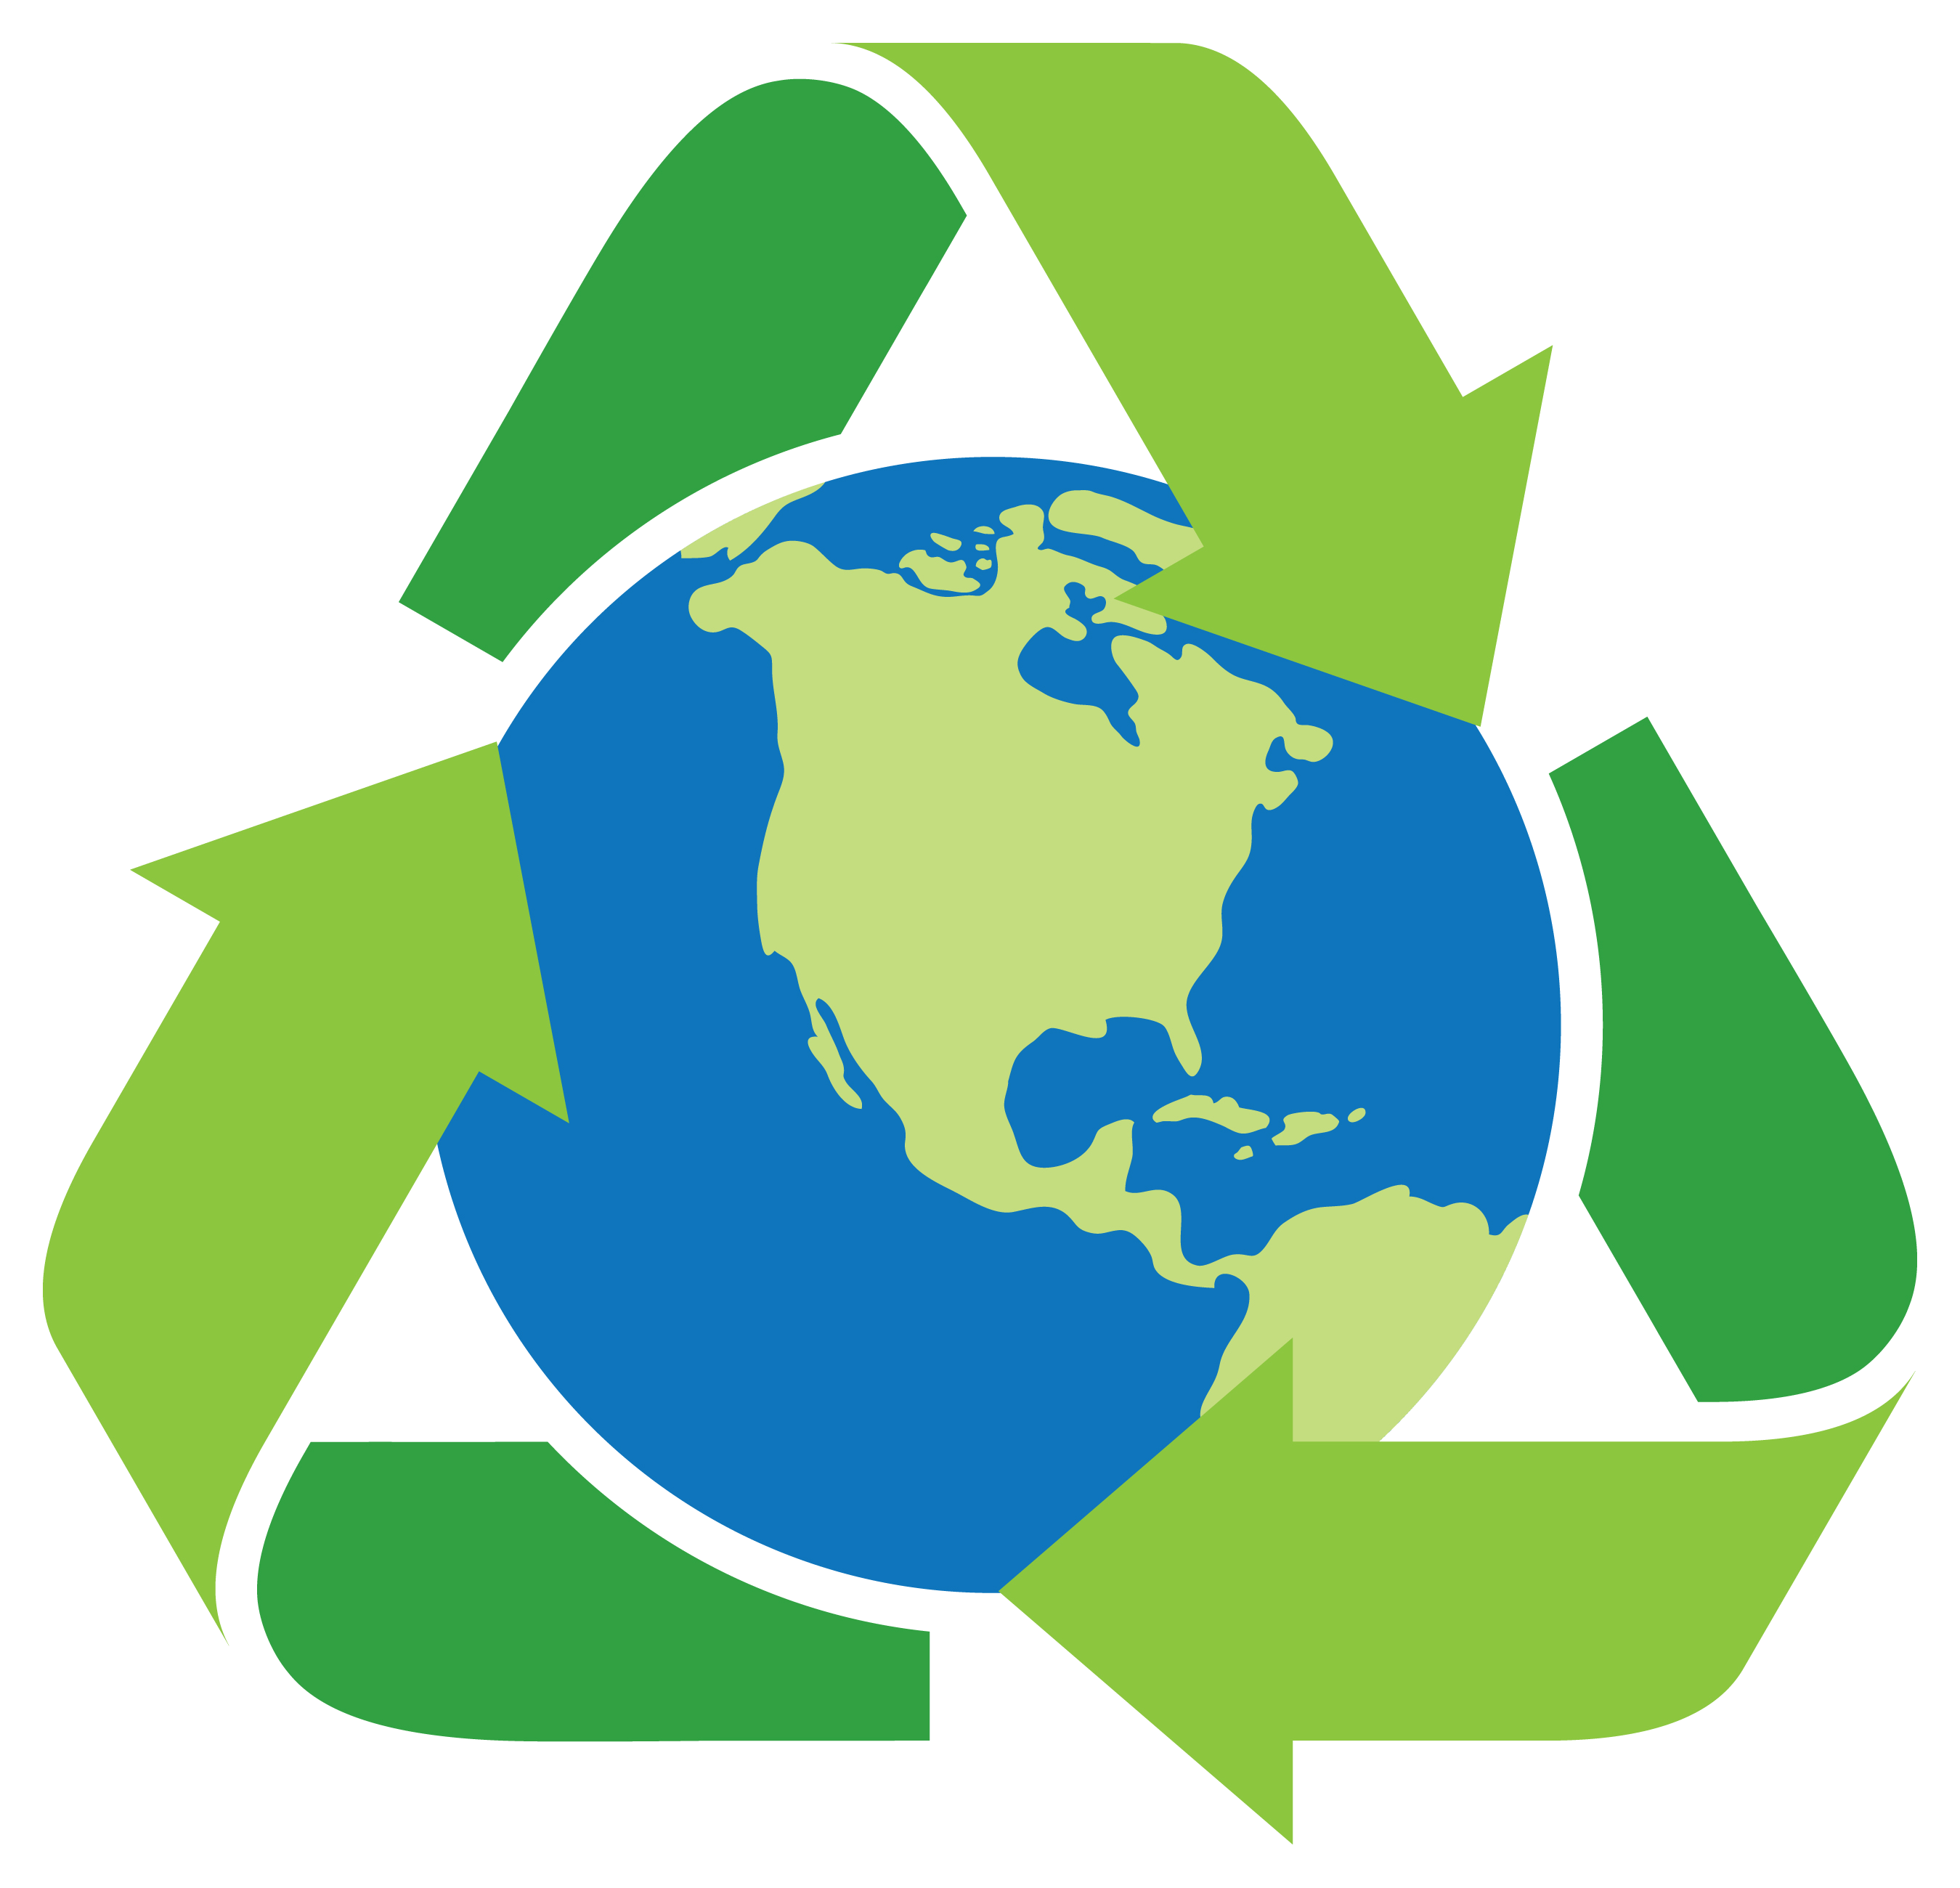 Recycle Png Images Recycling Symbol Recycle Icon Free Download Free Transparent Png Logos